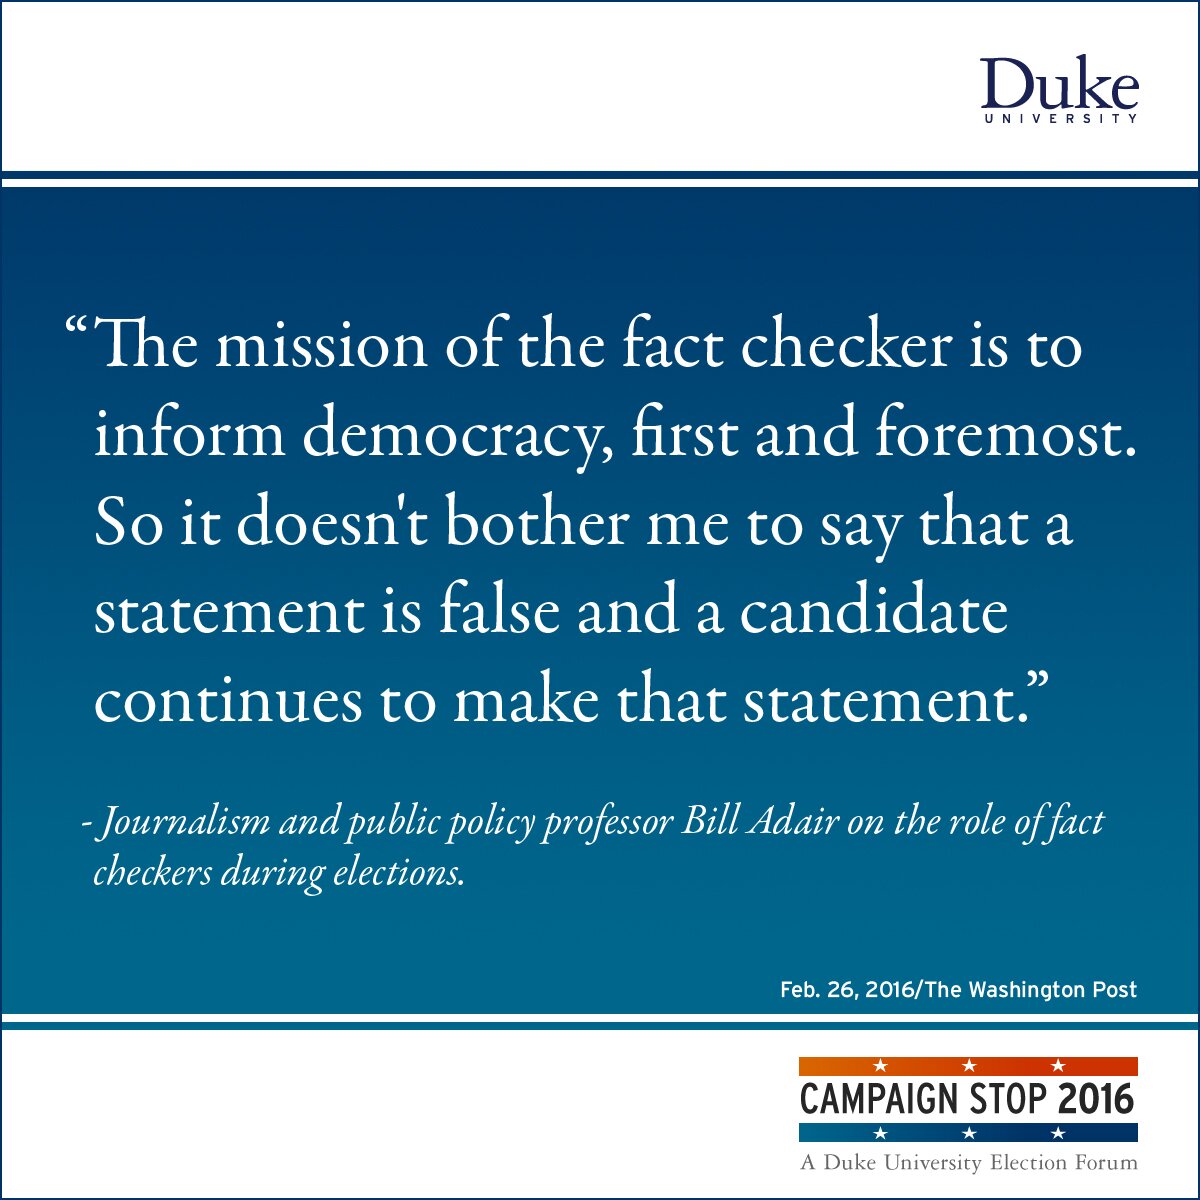 “The mission of the fact checker is to inform democracy, first and foremost. So it doesn